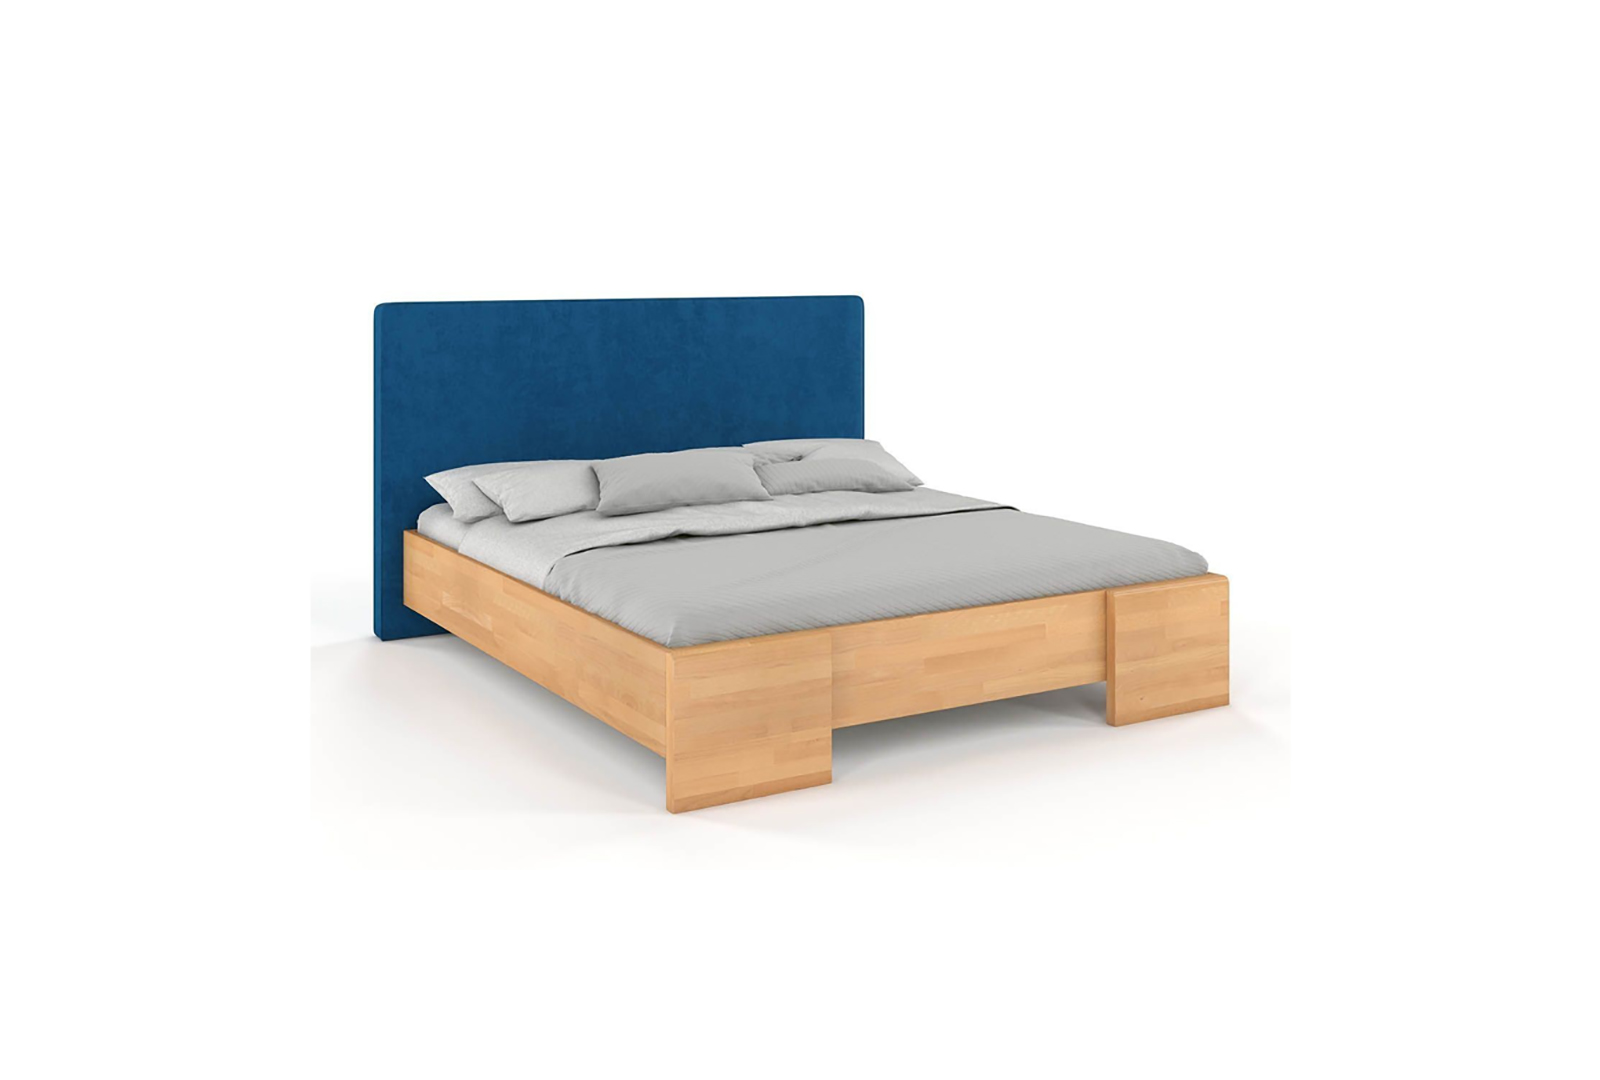 VISBY HESSEL WOODEN BEECH BED WITH AN UPHOLSTERED HEADBOARD 3